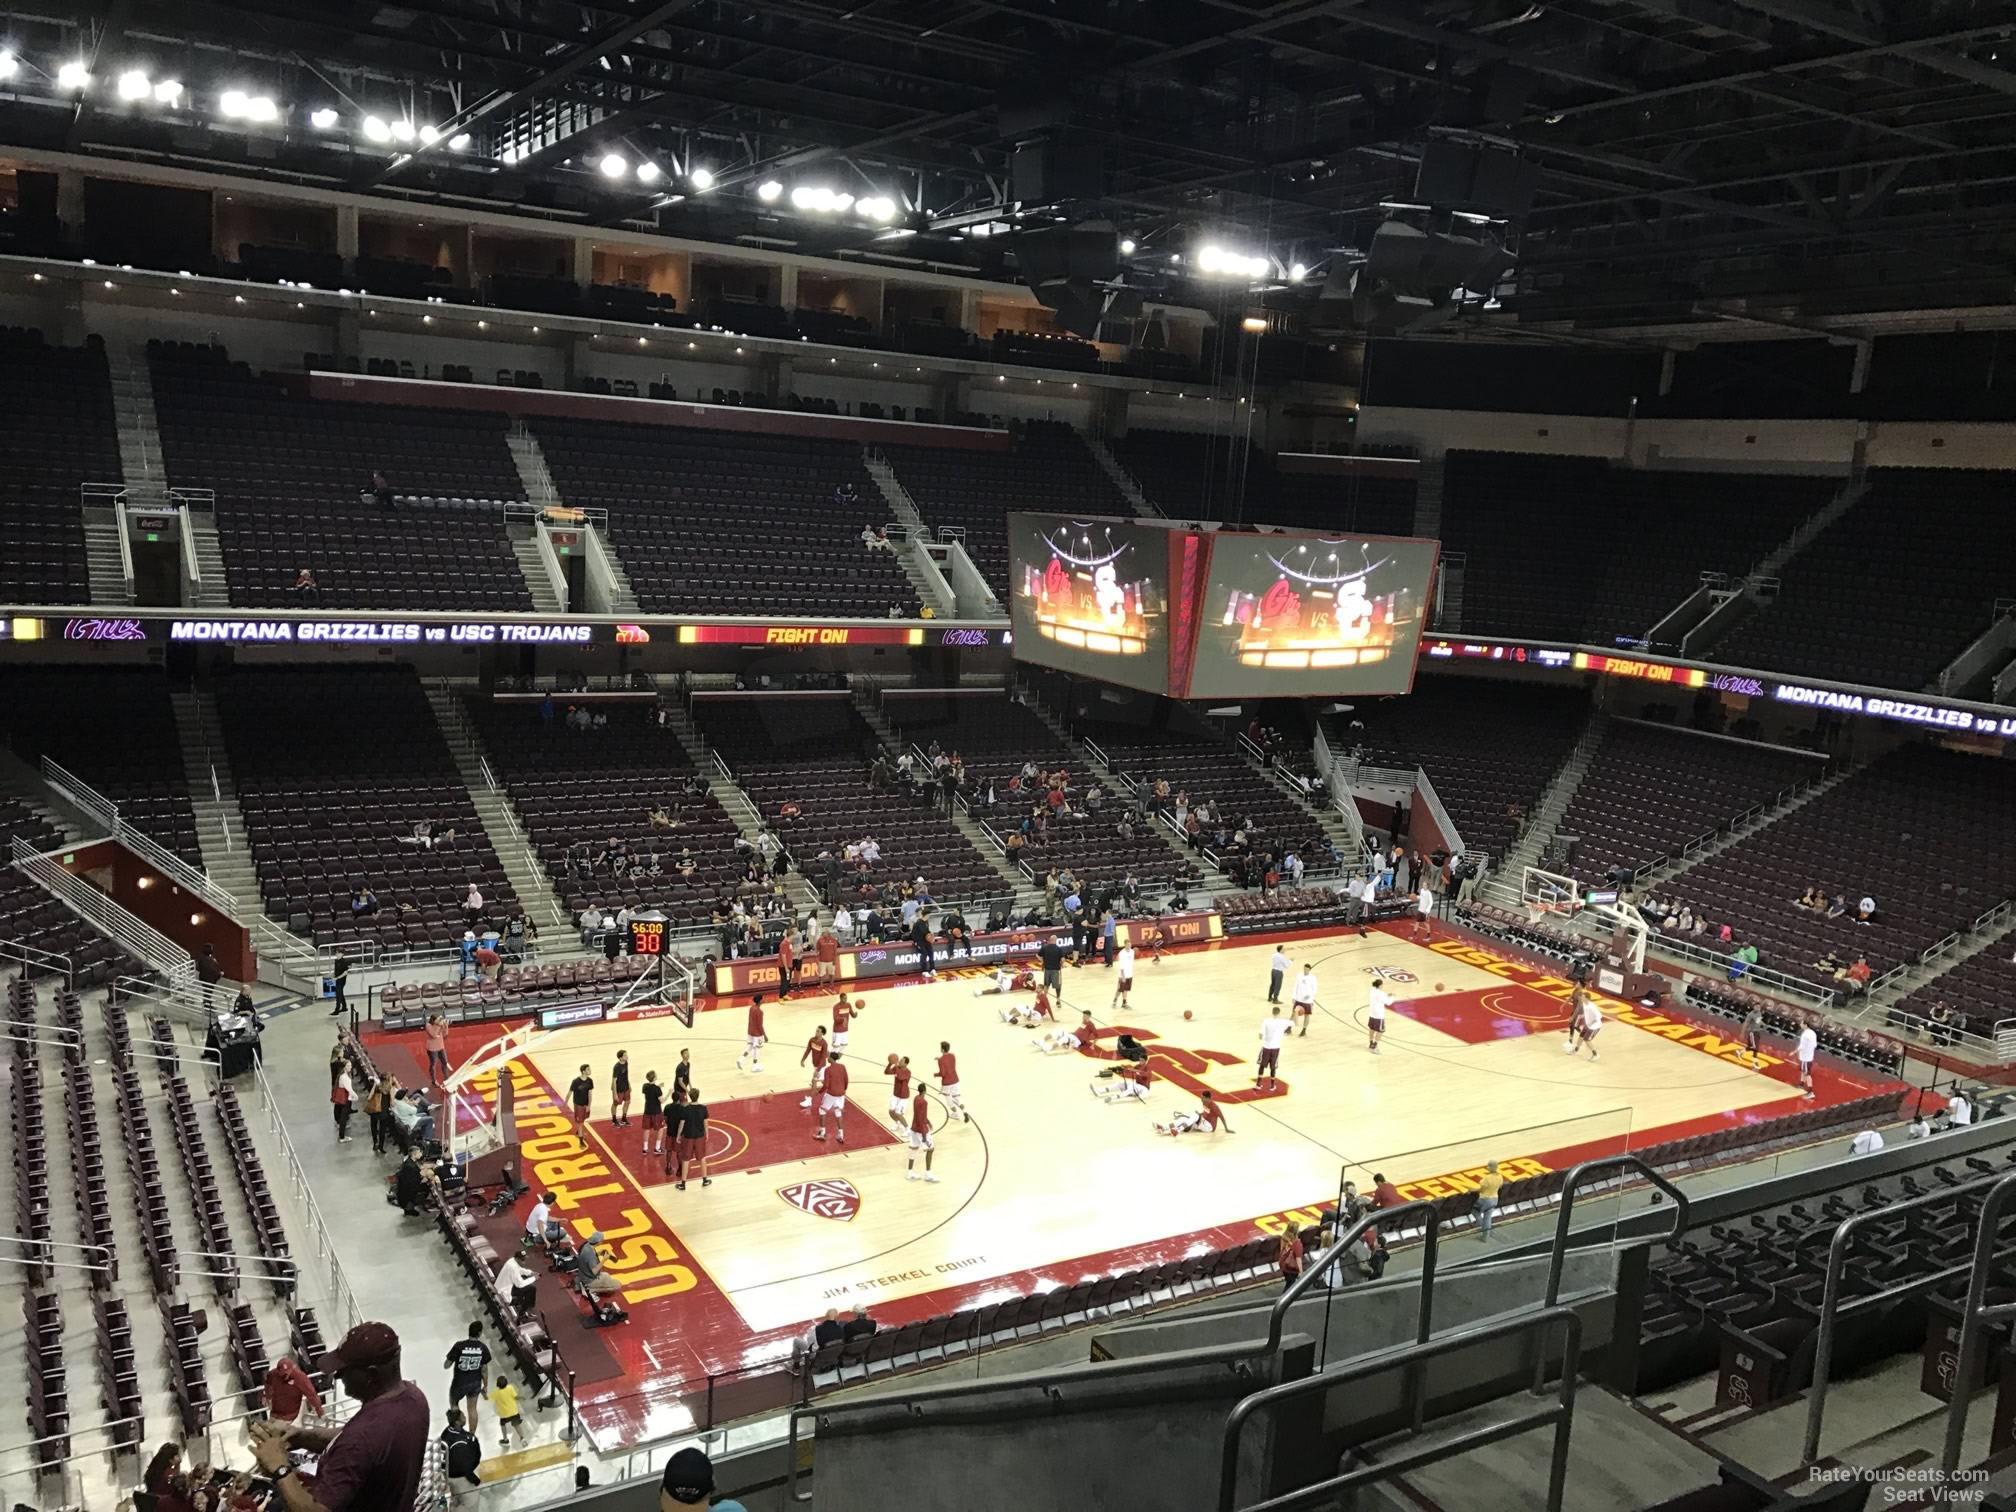 section 203, row 10 seat view  - galen center